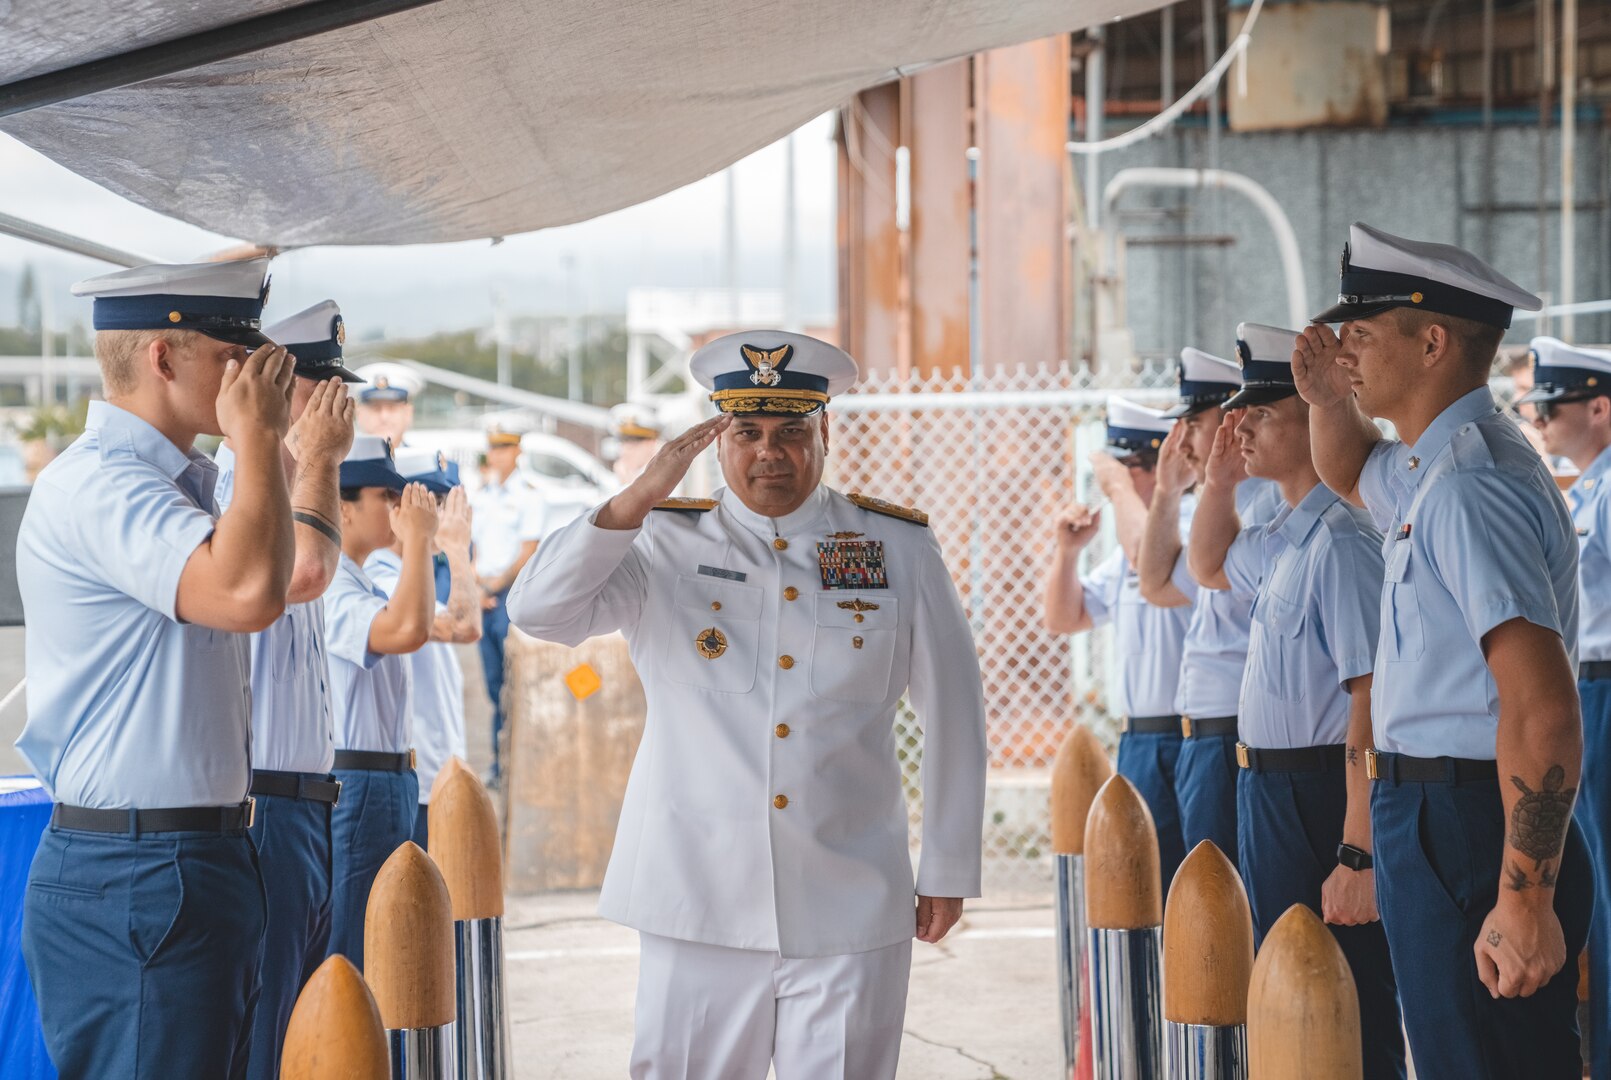 U.S. Coast Guard Cutter Harriet Lane (WMEC 903) and crew held a ceremony celebrating their recent home port shift to Joint Base Pearl Harbor-Hickam, Tuesday, presided over by Adm. Steven Poulin, vice commandant, U.S. Coast Guard. The Harriet Lane is U.S. Coast Guard Pacific Area’s newest Indo-Pacific support cutter. Harriet Lane and crew departed Coast Guard Base Portsmouth, Virginia, November 2023, and arrived at Pearl Harbor, Hawaii, December 2023, after transiting more than 8,000 nautical miles for over 36-days. (Photo by Petty Officer 2nd Class Ty Robertson)